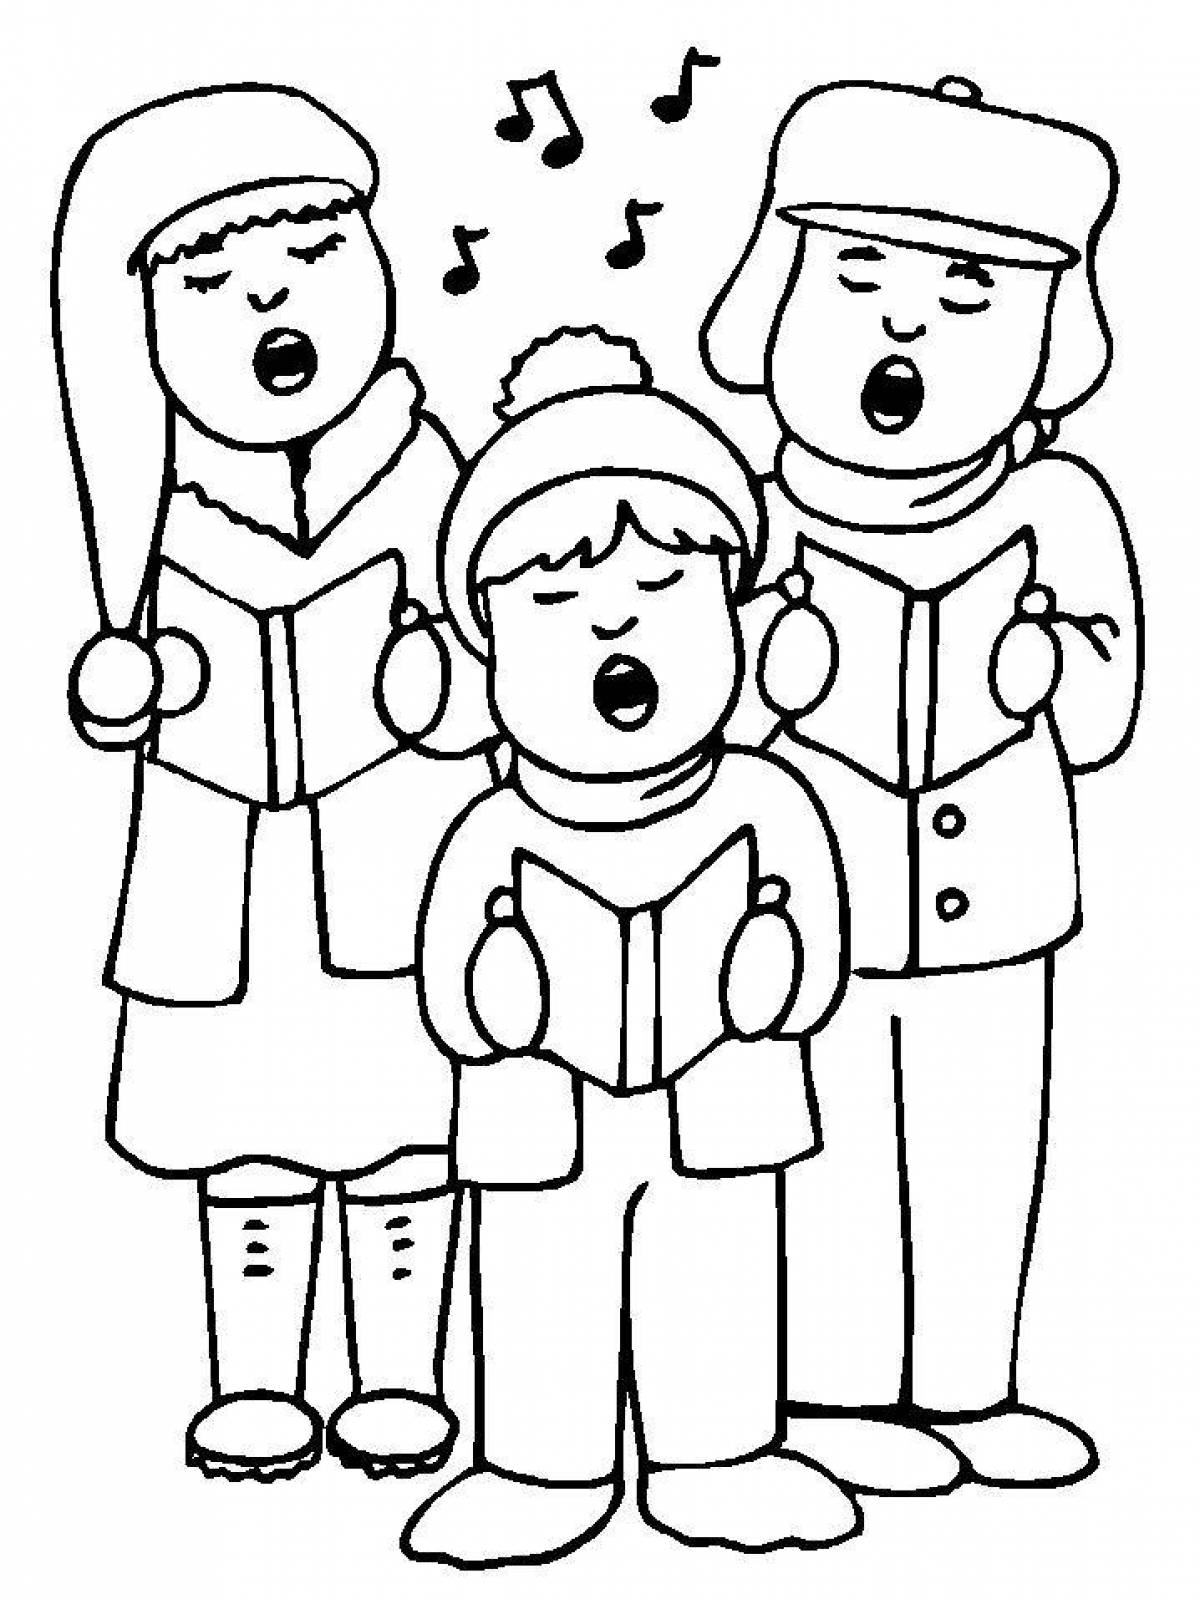 Inspirational carol coloring pages for kids